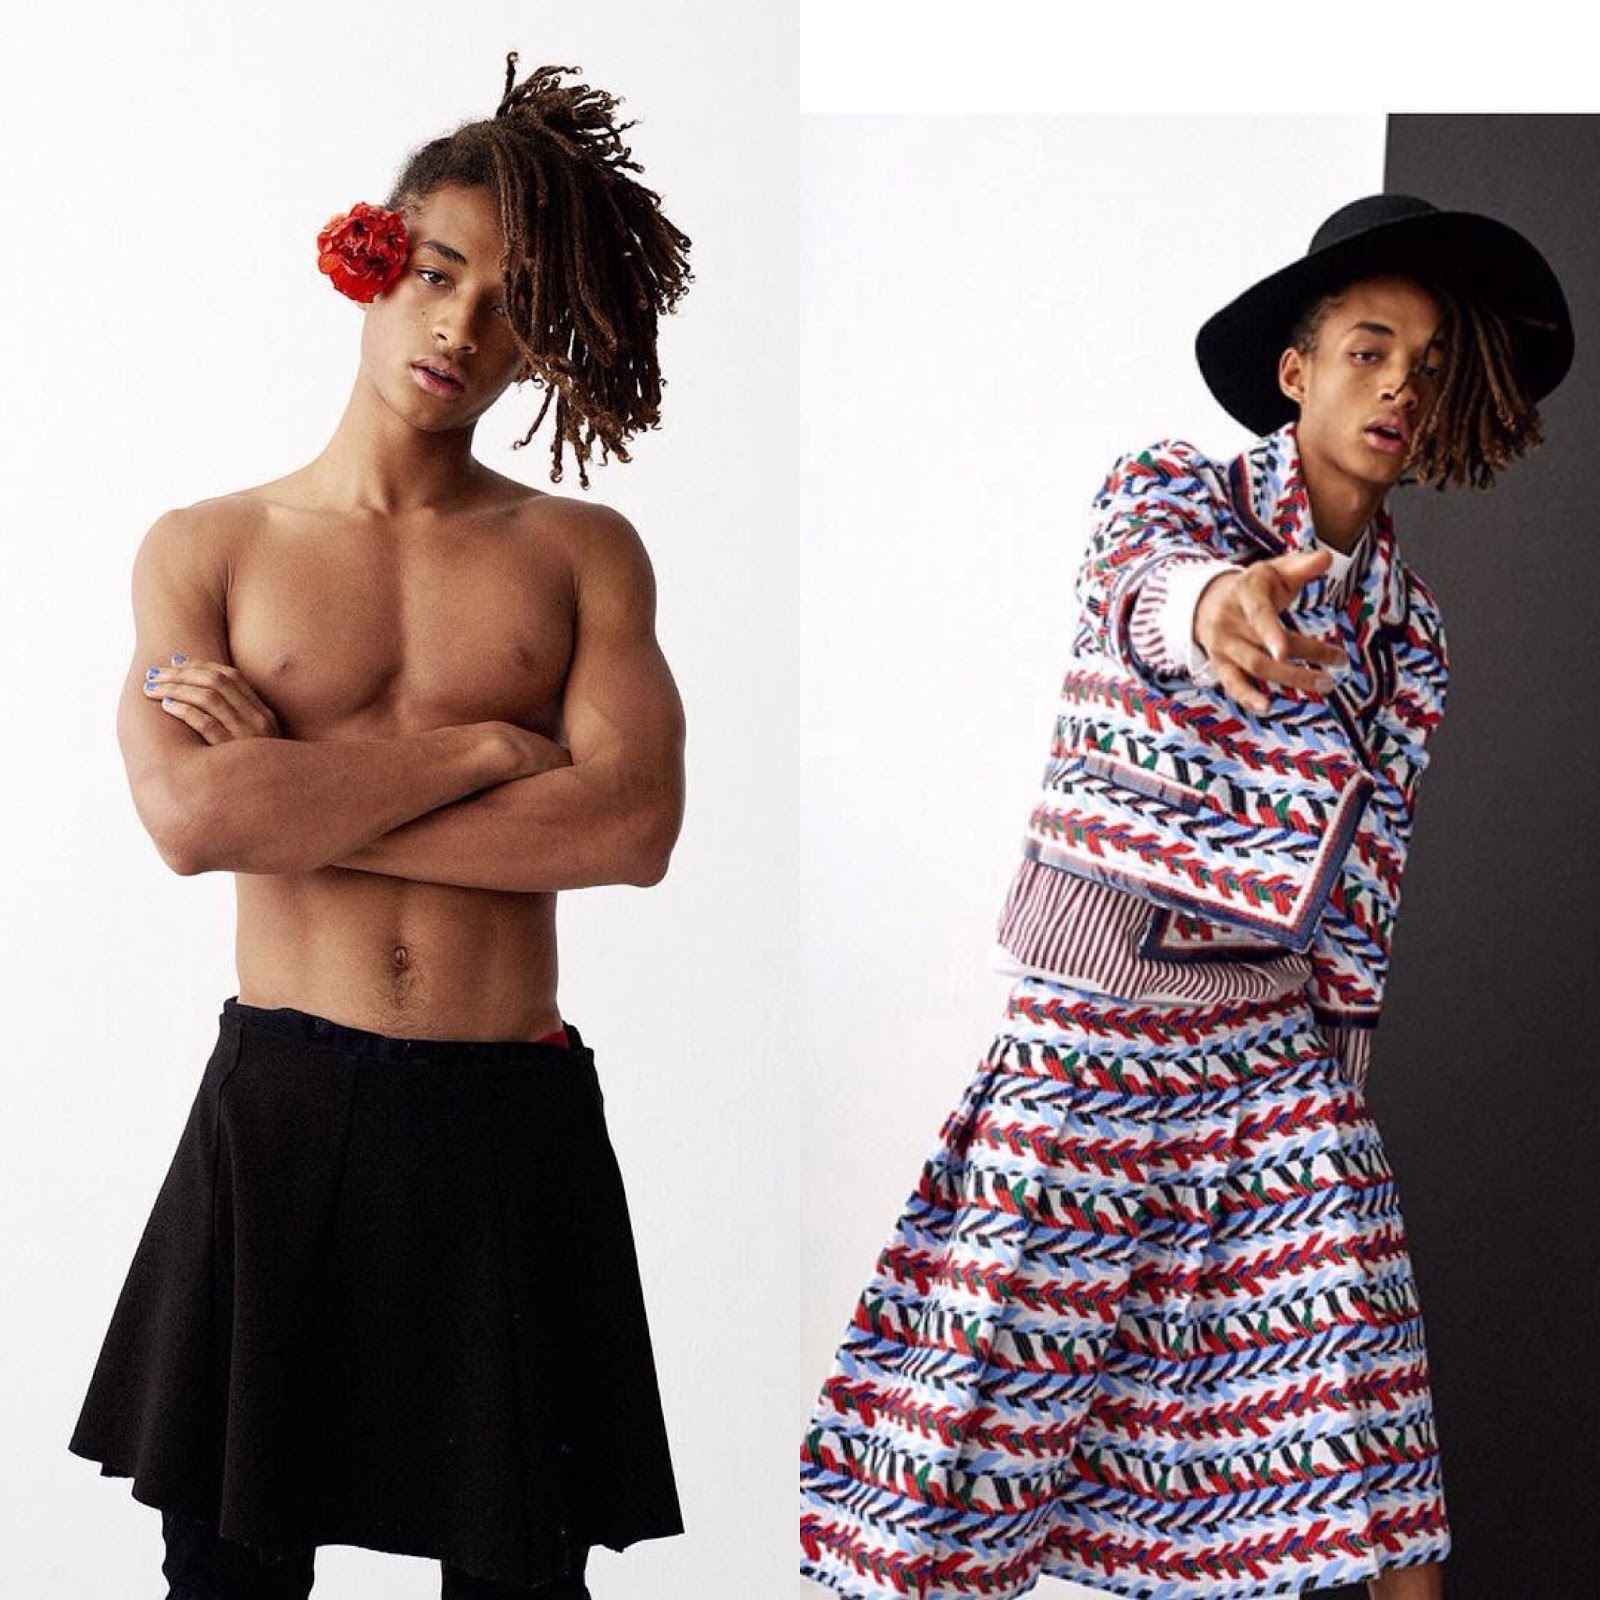 Recently, there has been more of a push for gender neutral clothing, as des...